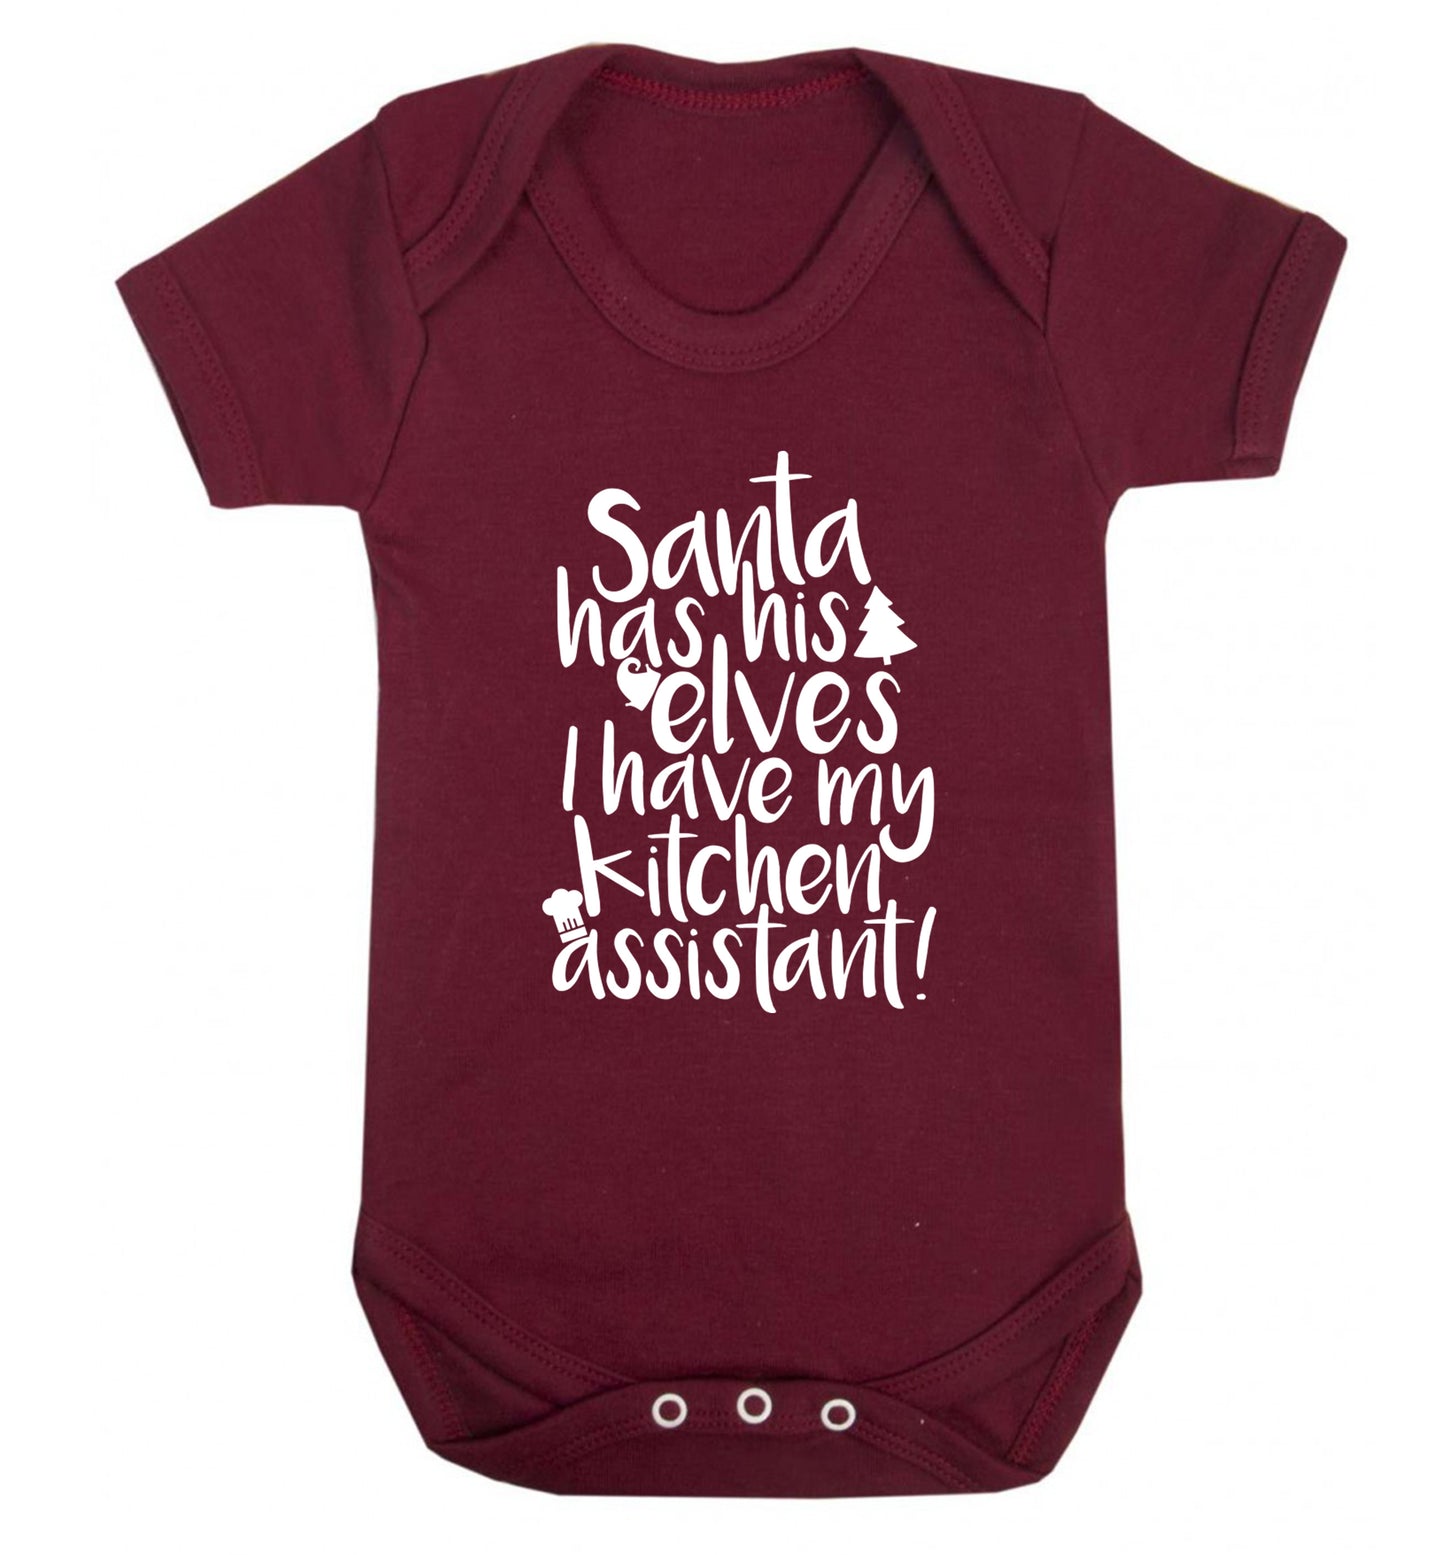 Santa has his elves I have my kitchen assistant Baby Vest maroon 18-24 months